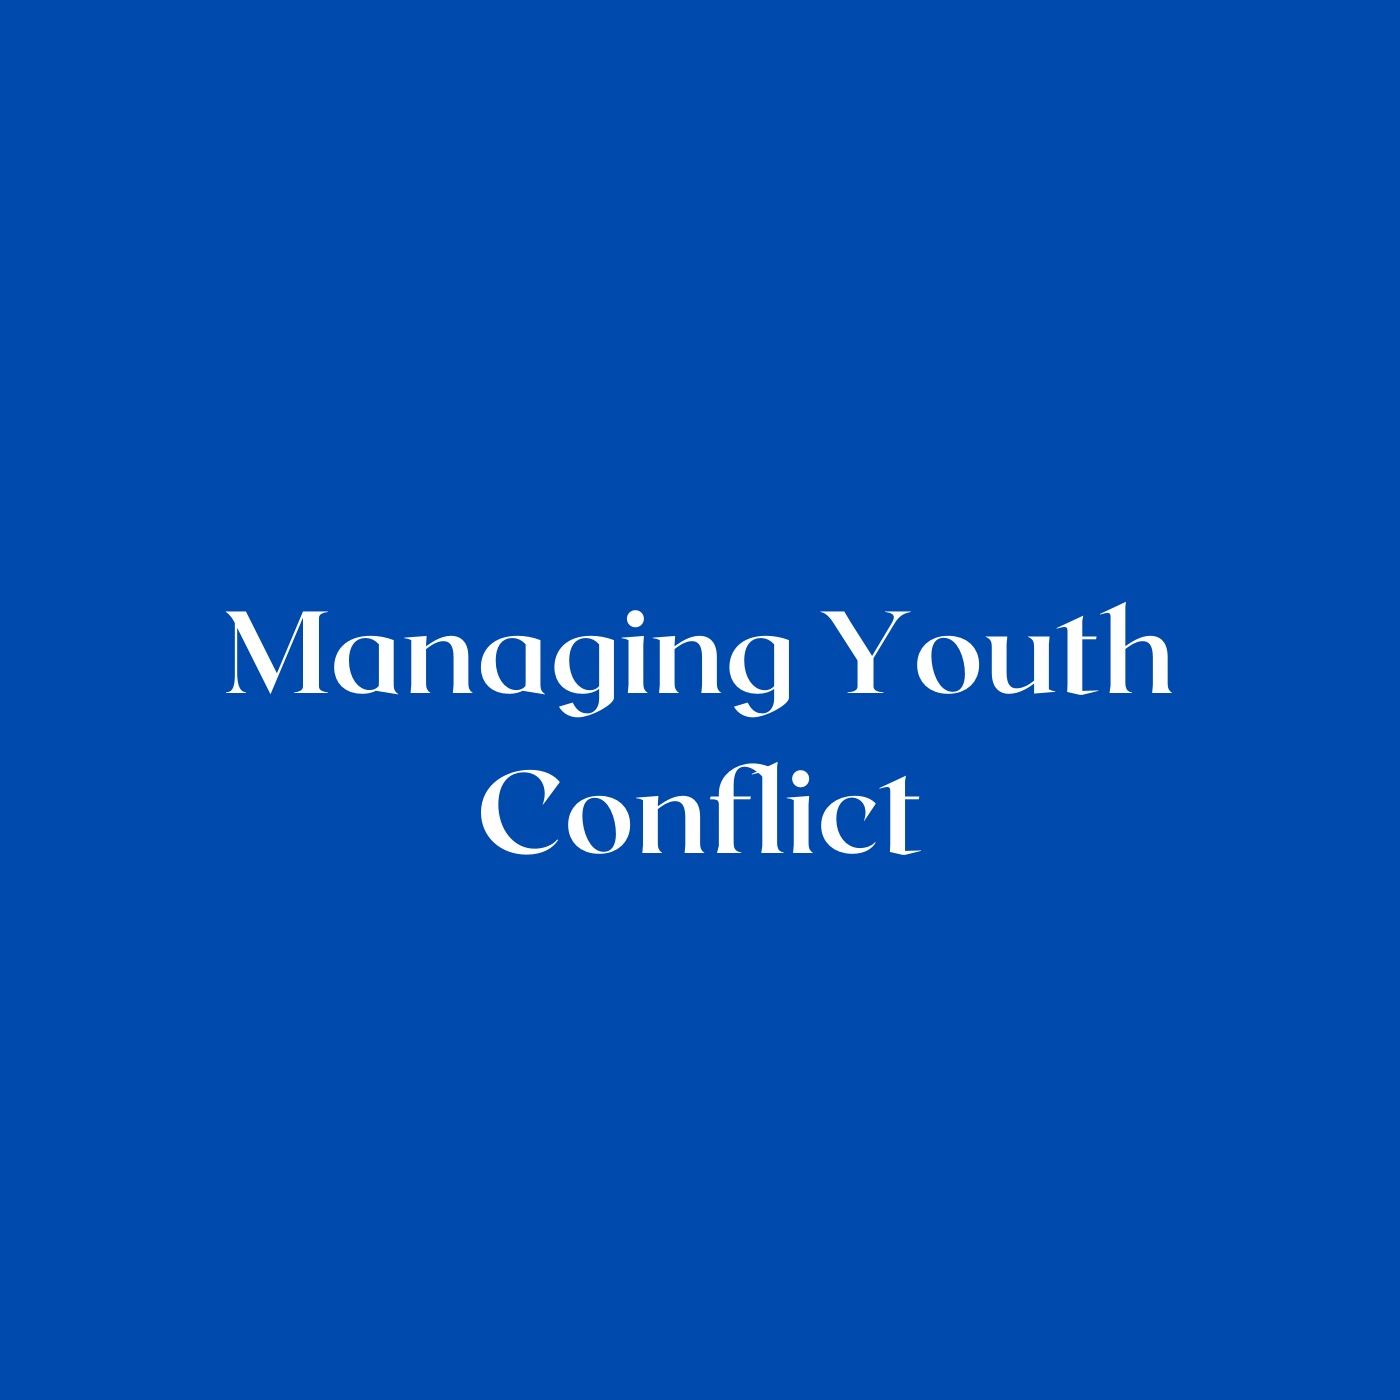 Managing Youth Conflict